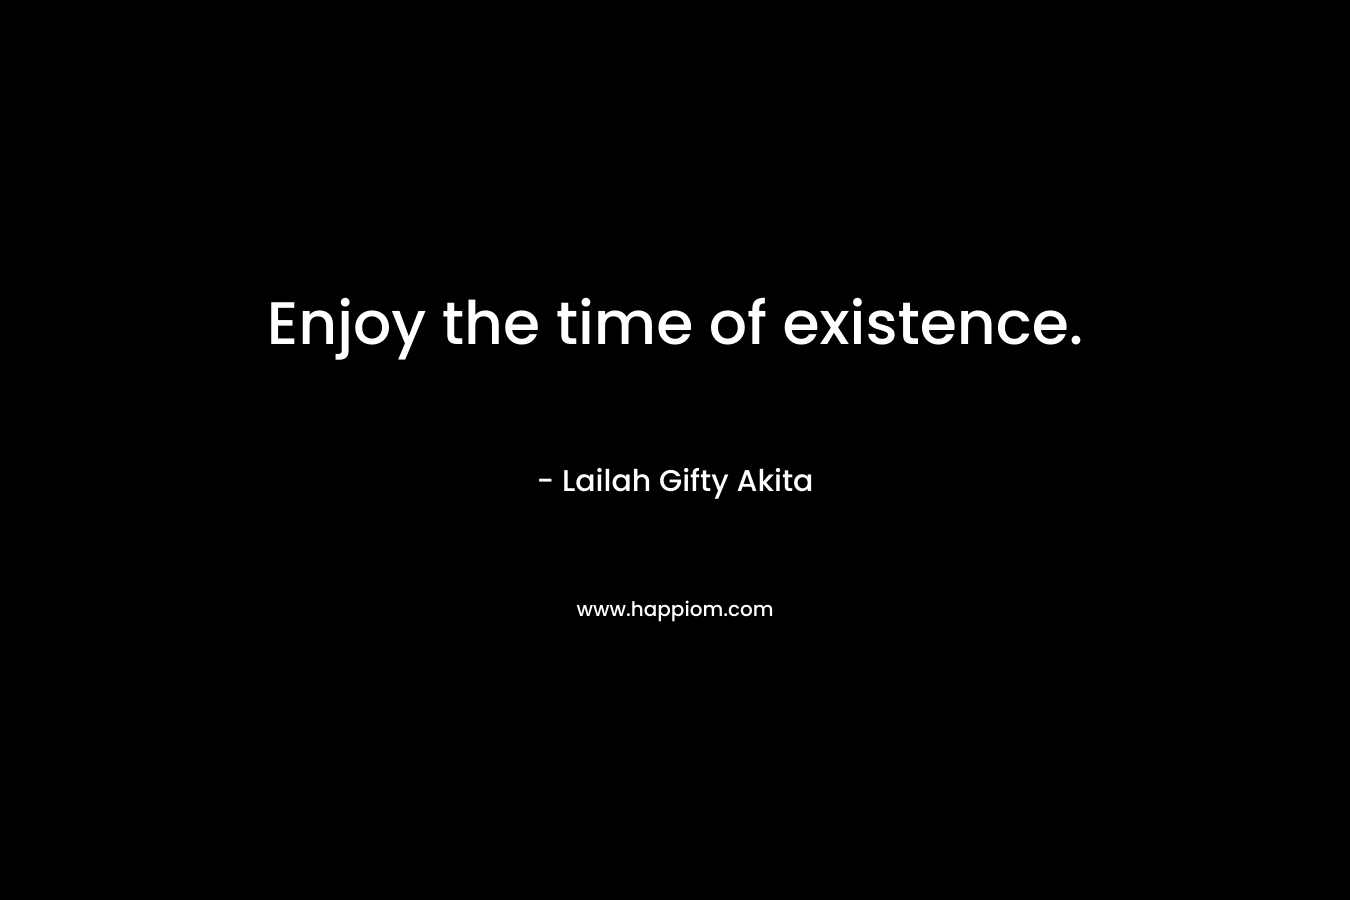 Enjoy the time of existence.